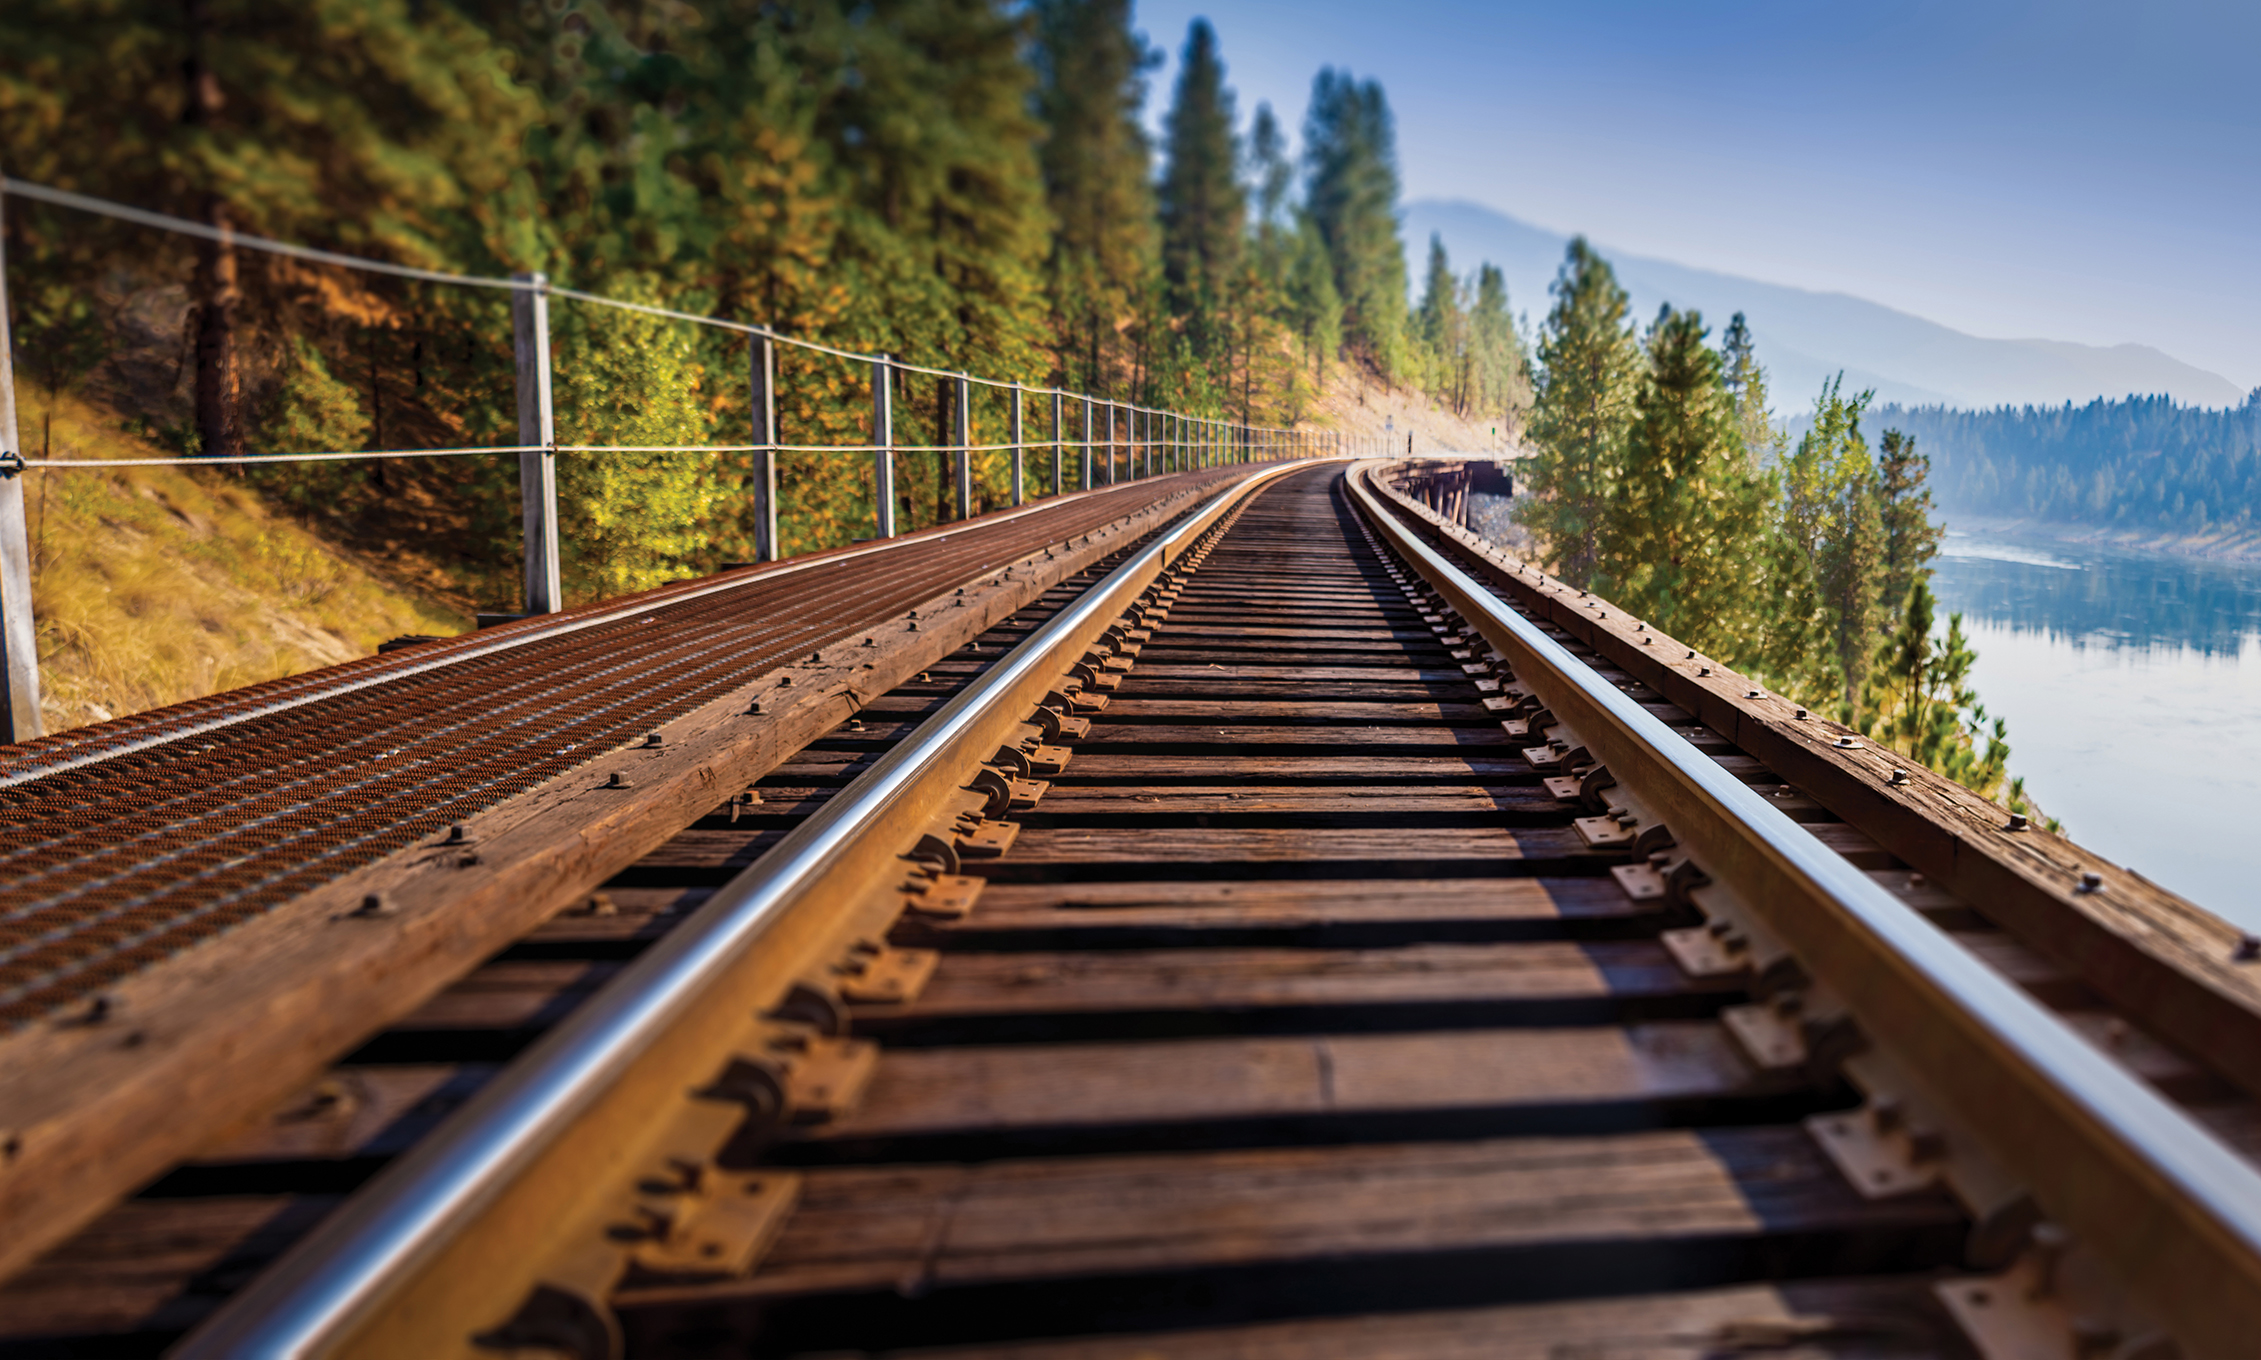 TiEnergy: Where Railroads and Sustainability Meet